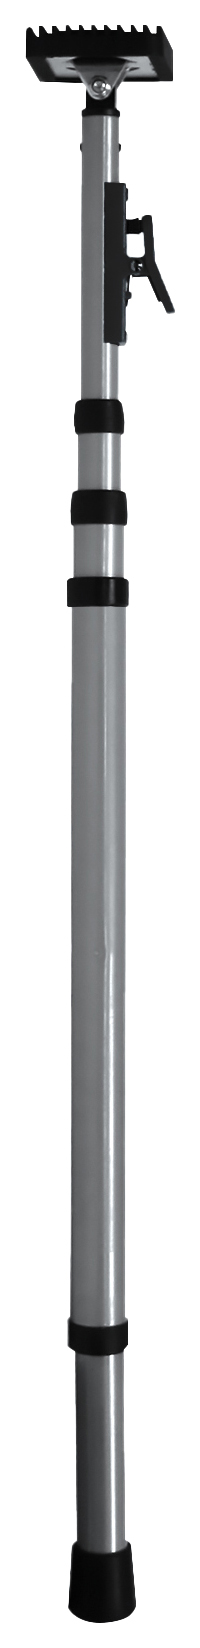 Trimaco E-Z Up 1.41m/3.66m Dust Containment Pole - Pack of 2